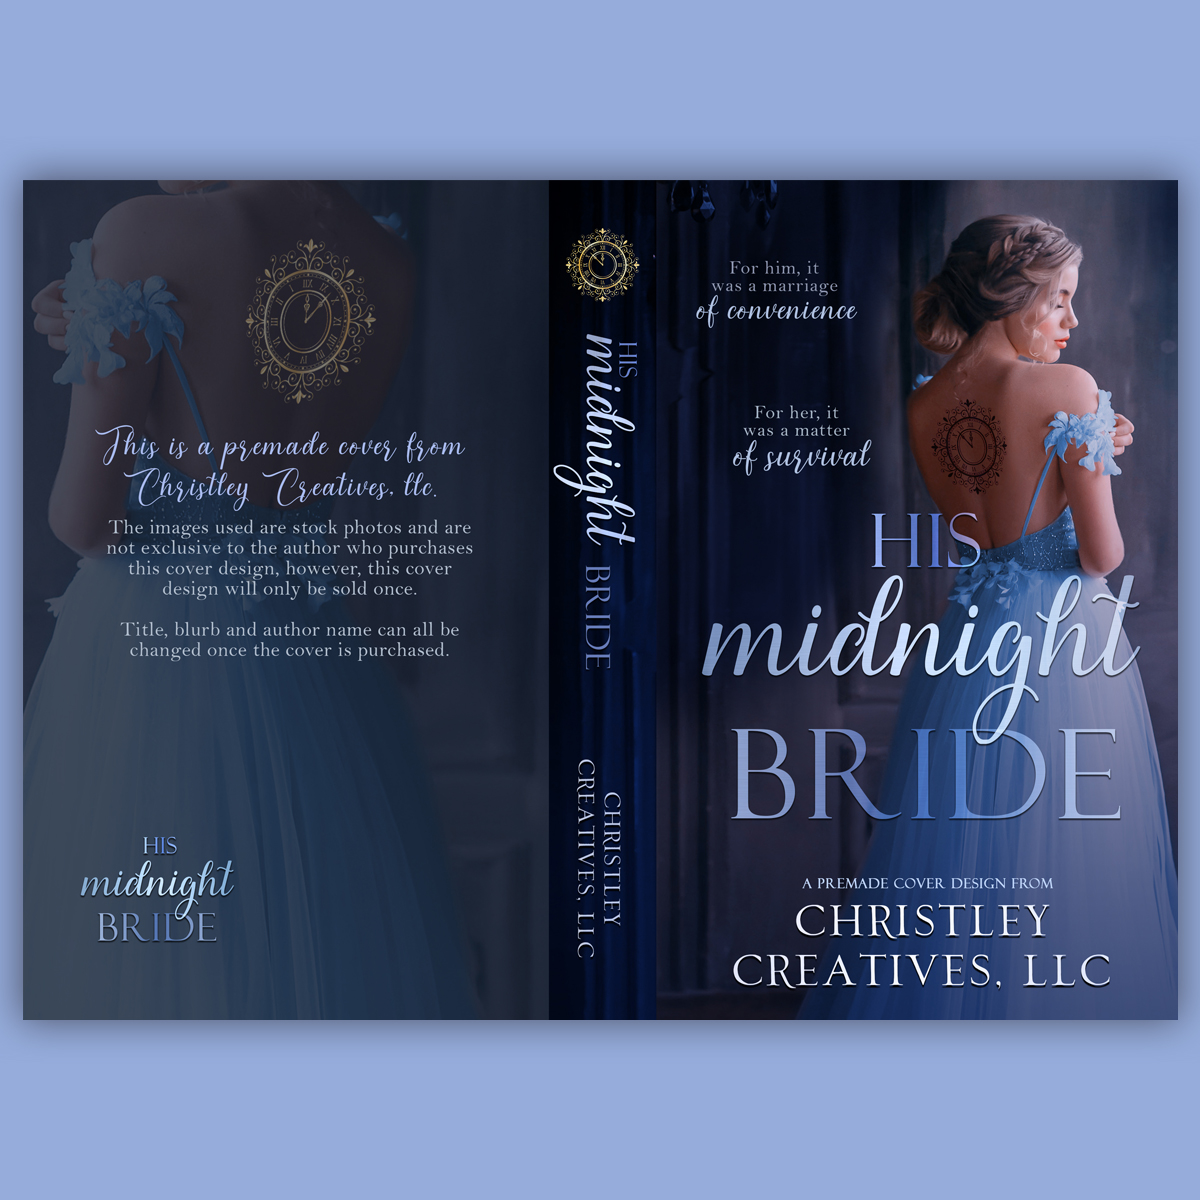 HIs Midnight Bride - Premade Contemporary Romance Fairytale Retelling Book Cover from Christley Creatives